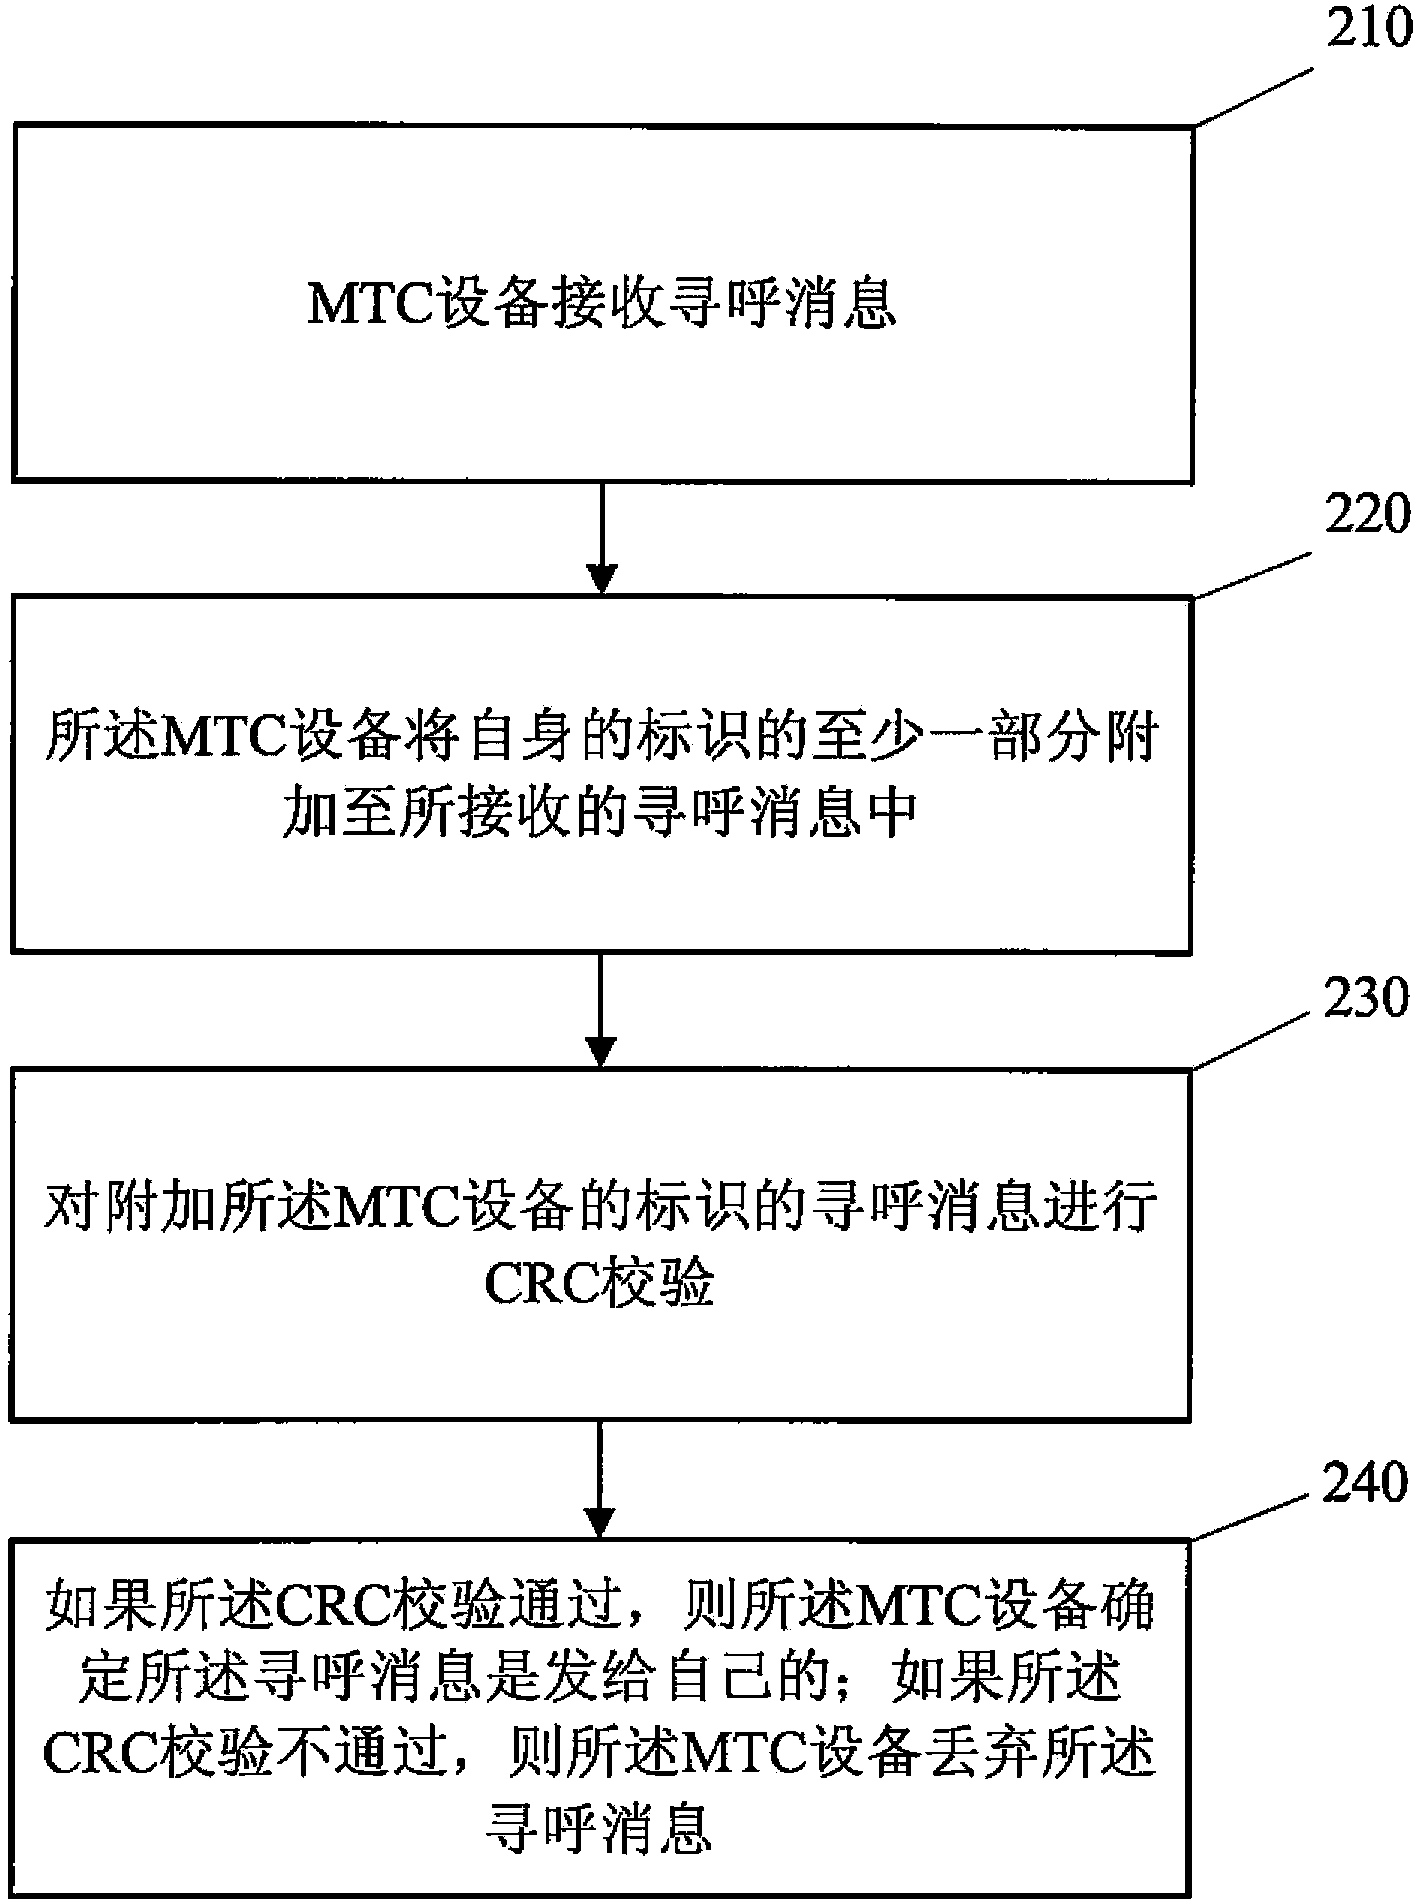 Methods and equipment for sending and receiving paging message in MTC (machine type communication)